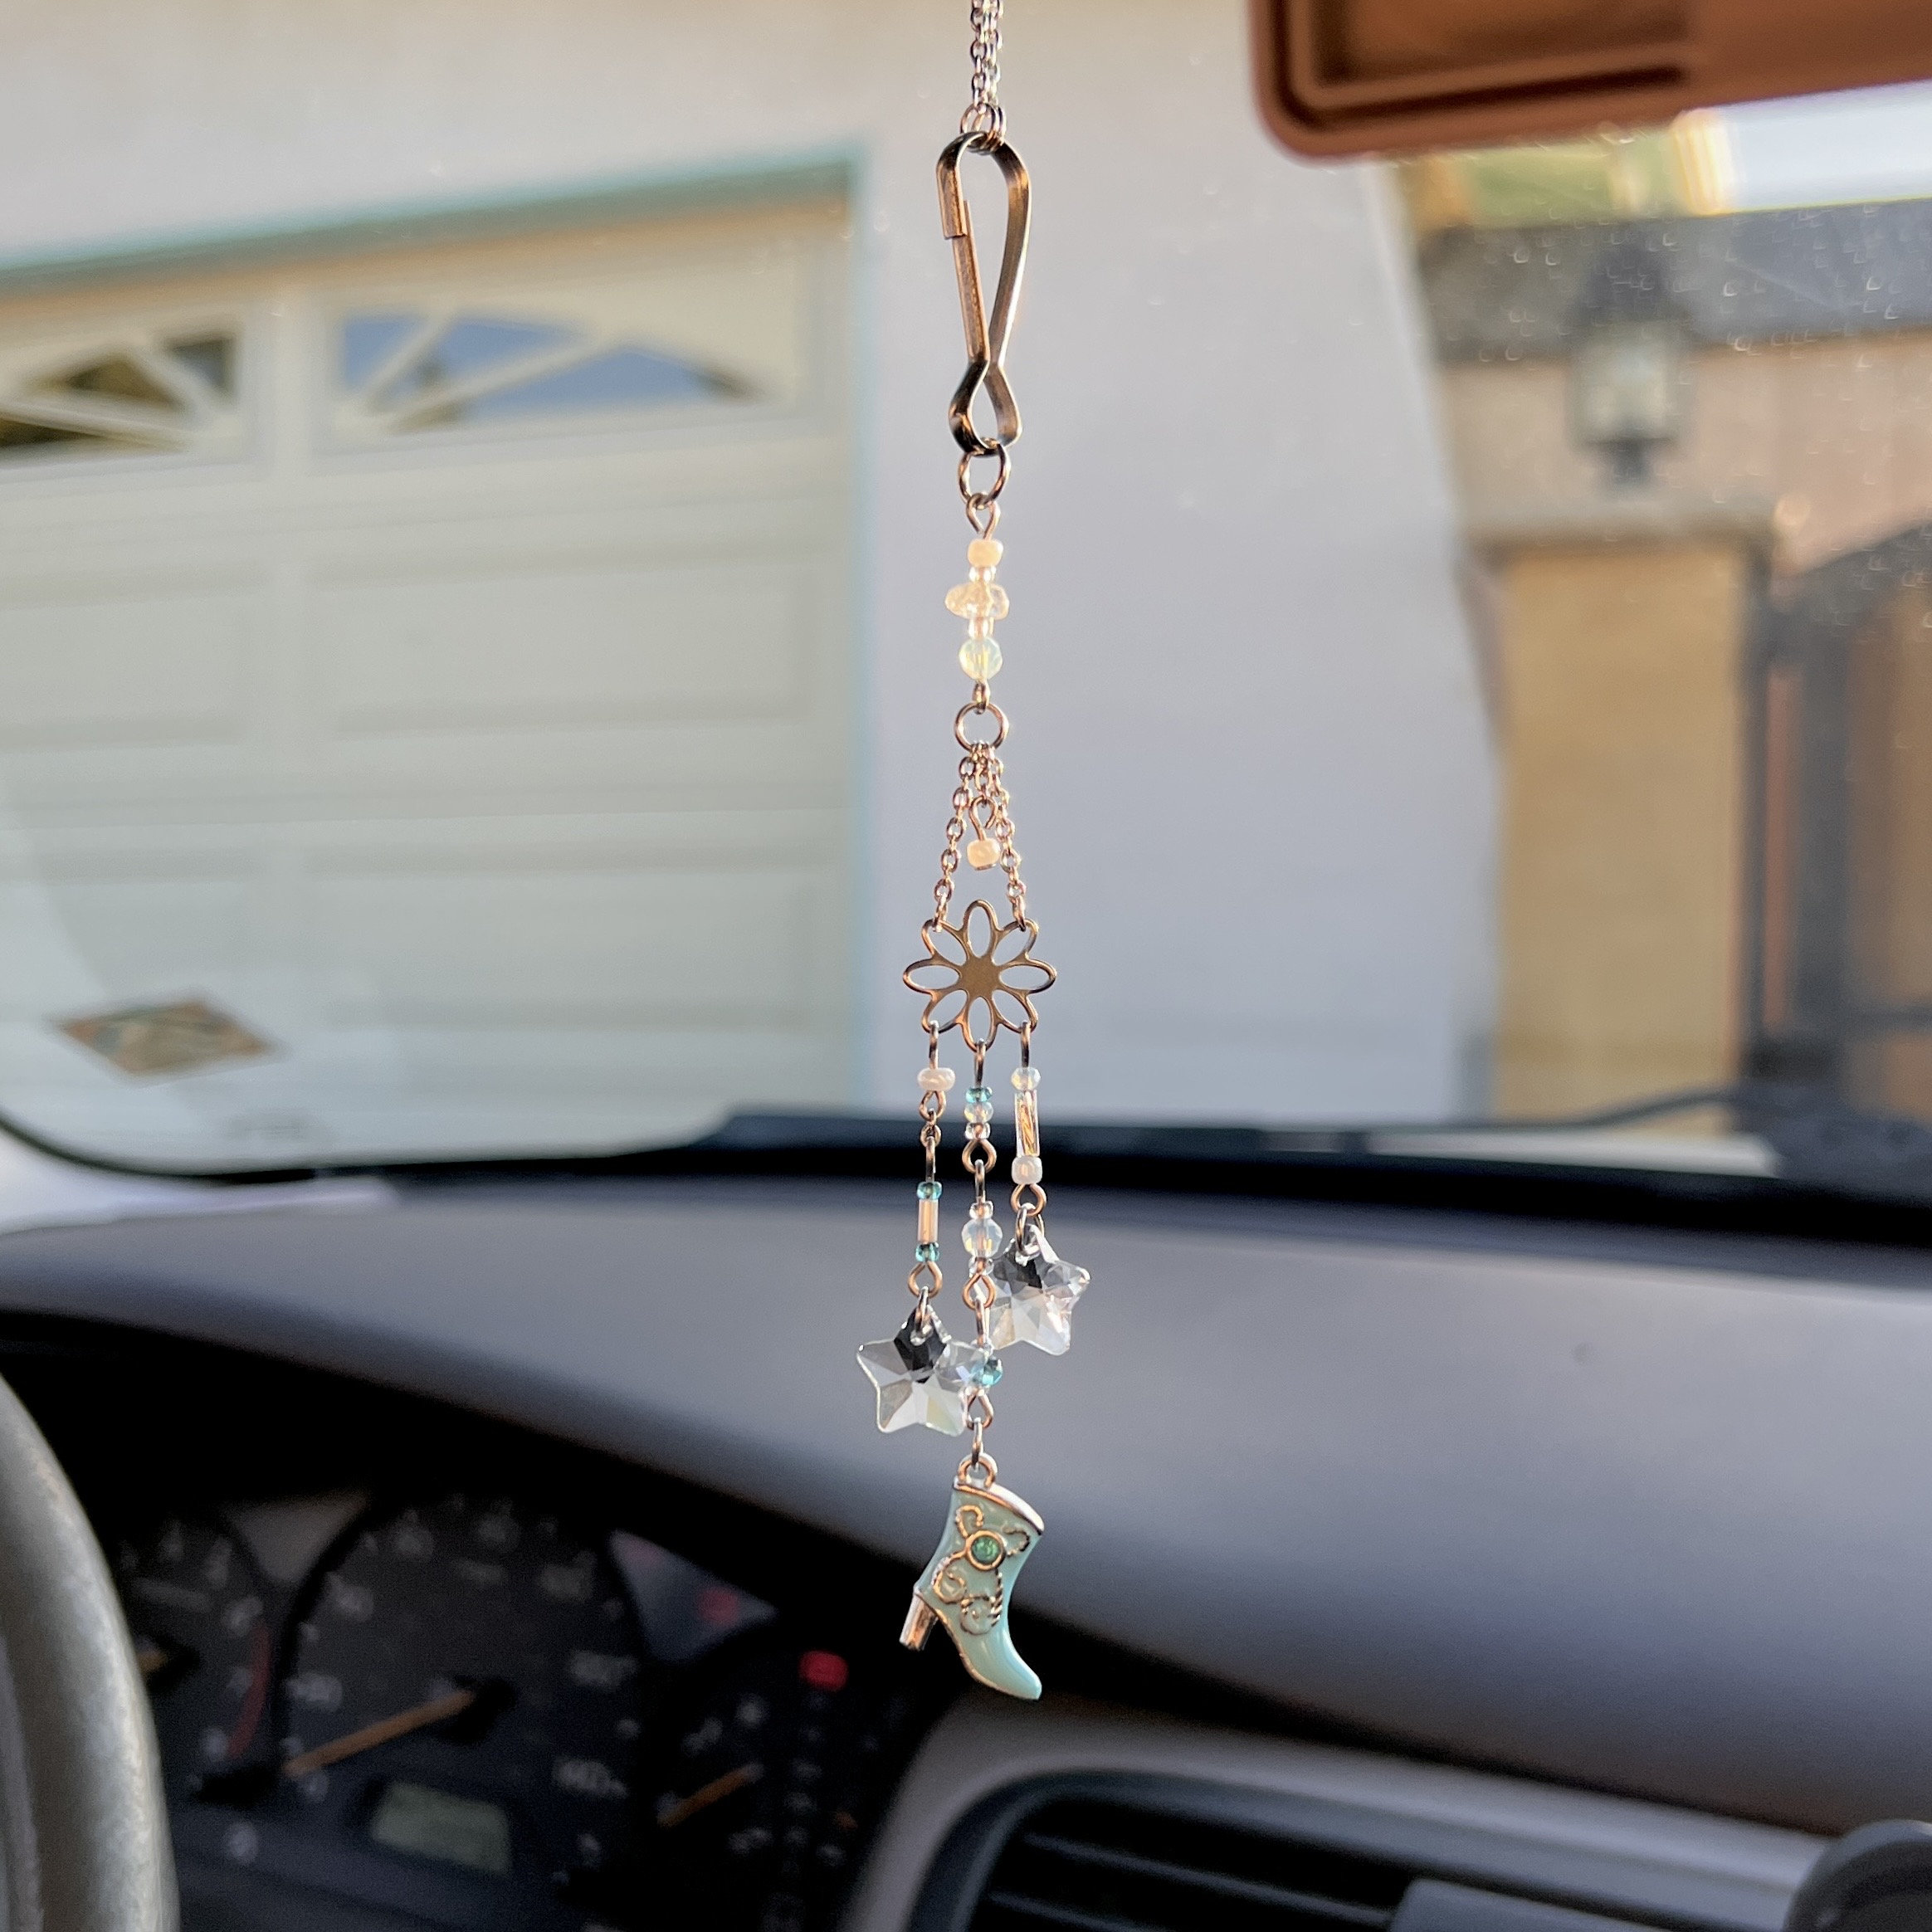 Womens Bling Rear View Mirror Hanging Accessories Set Love Heart And Pink  Plush Ball With Rhinestones, Crystals, And Diamonds From Dhgatetop_company,  $4.01